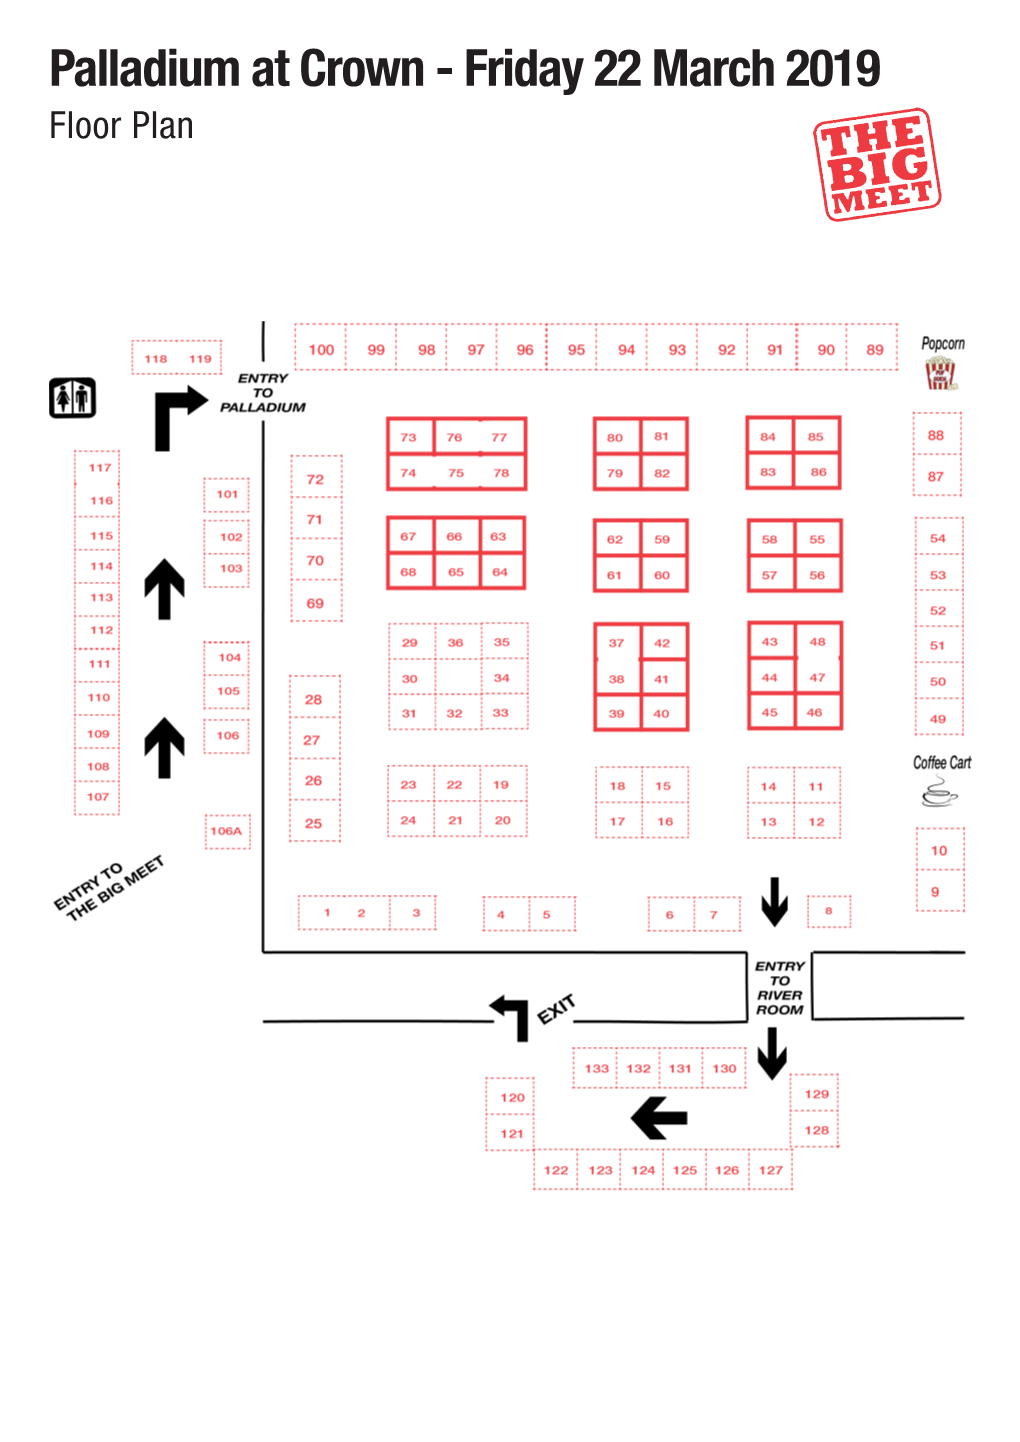 Friday 22 March 2019 Floor Plan Palladium at Crown - Friday 22 March 2019 Alphabetical List of Exhibitors